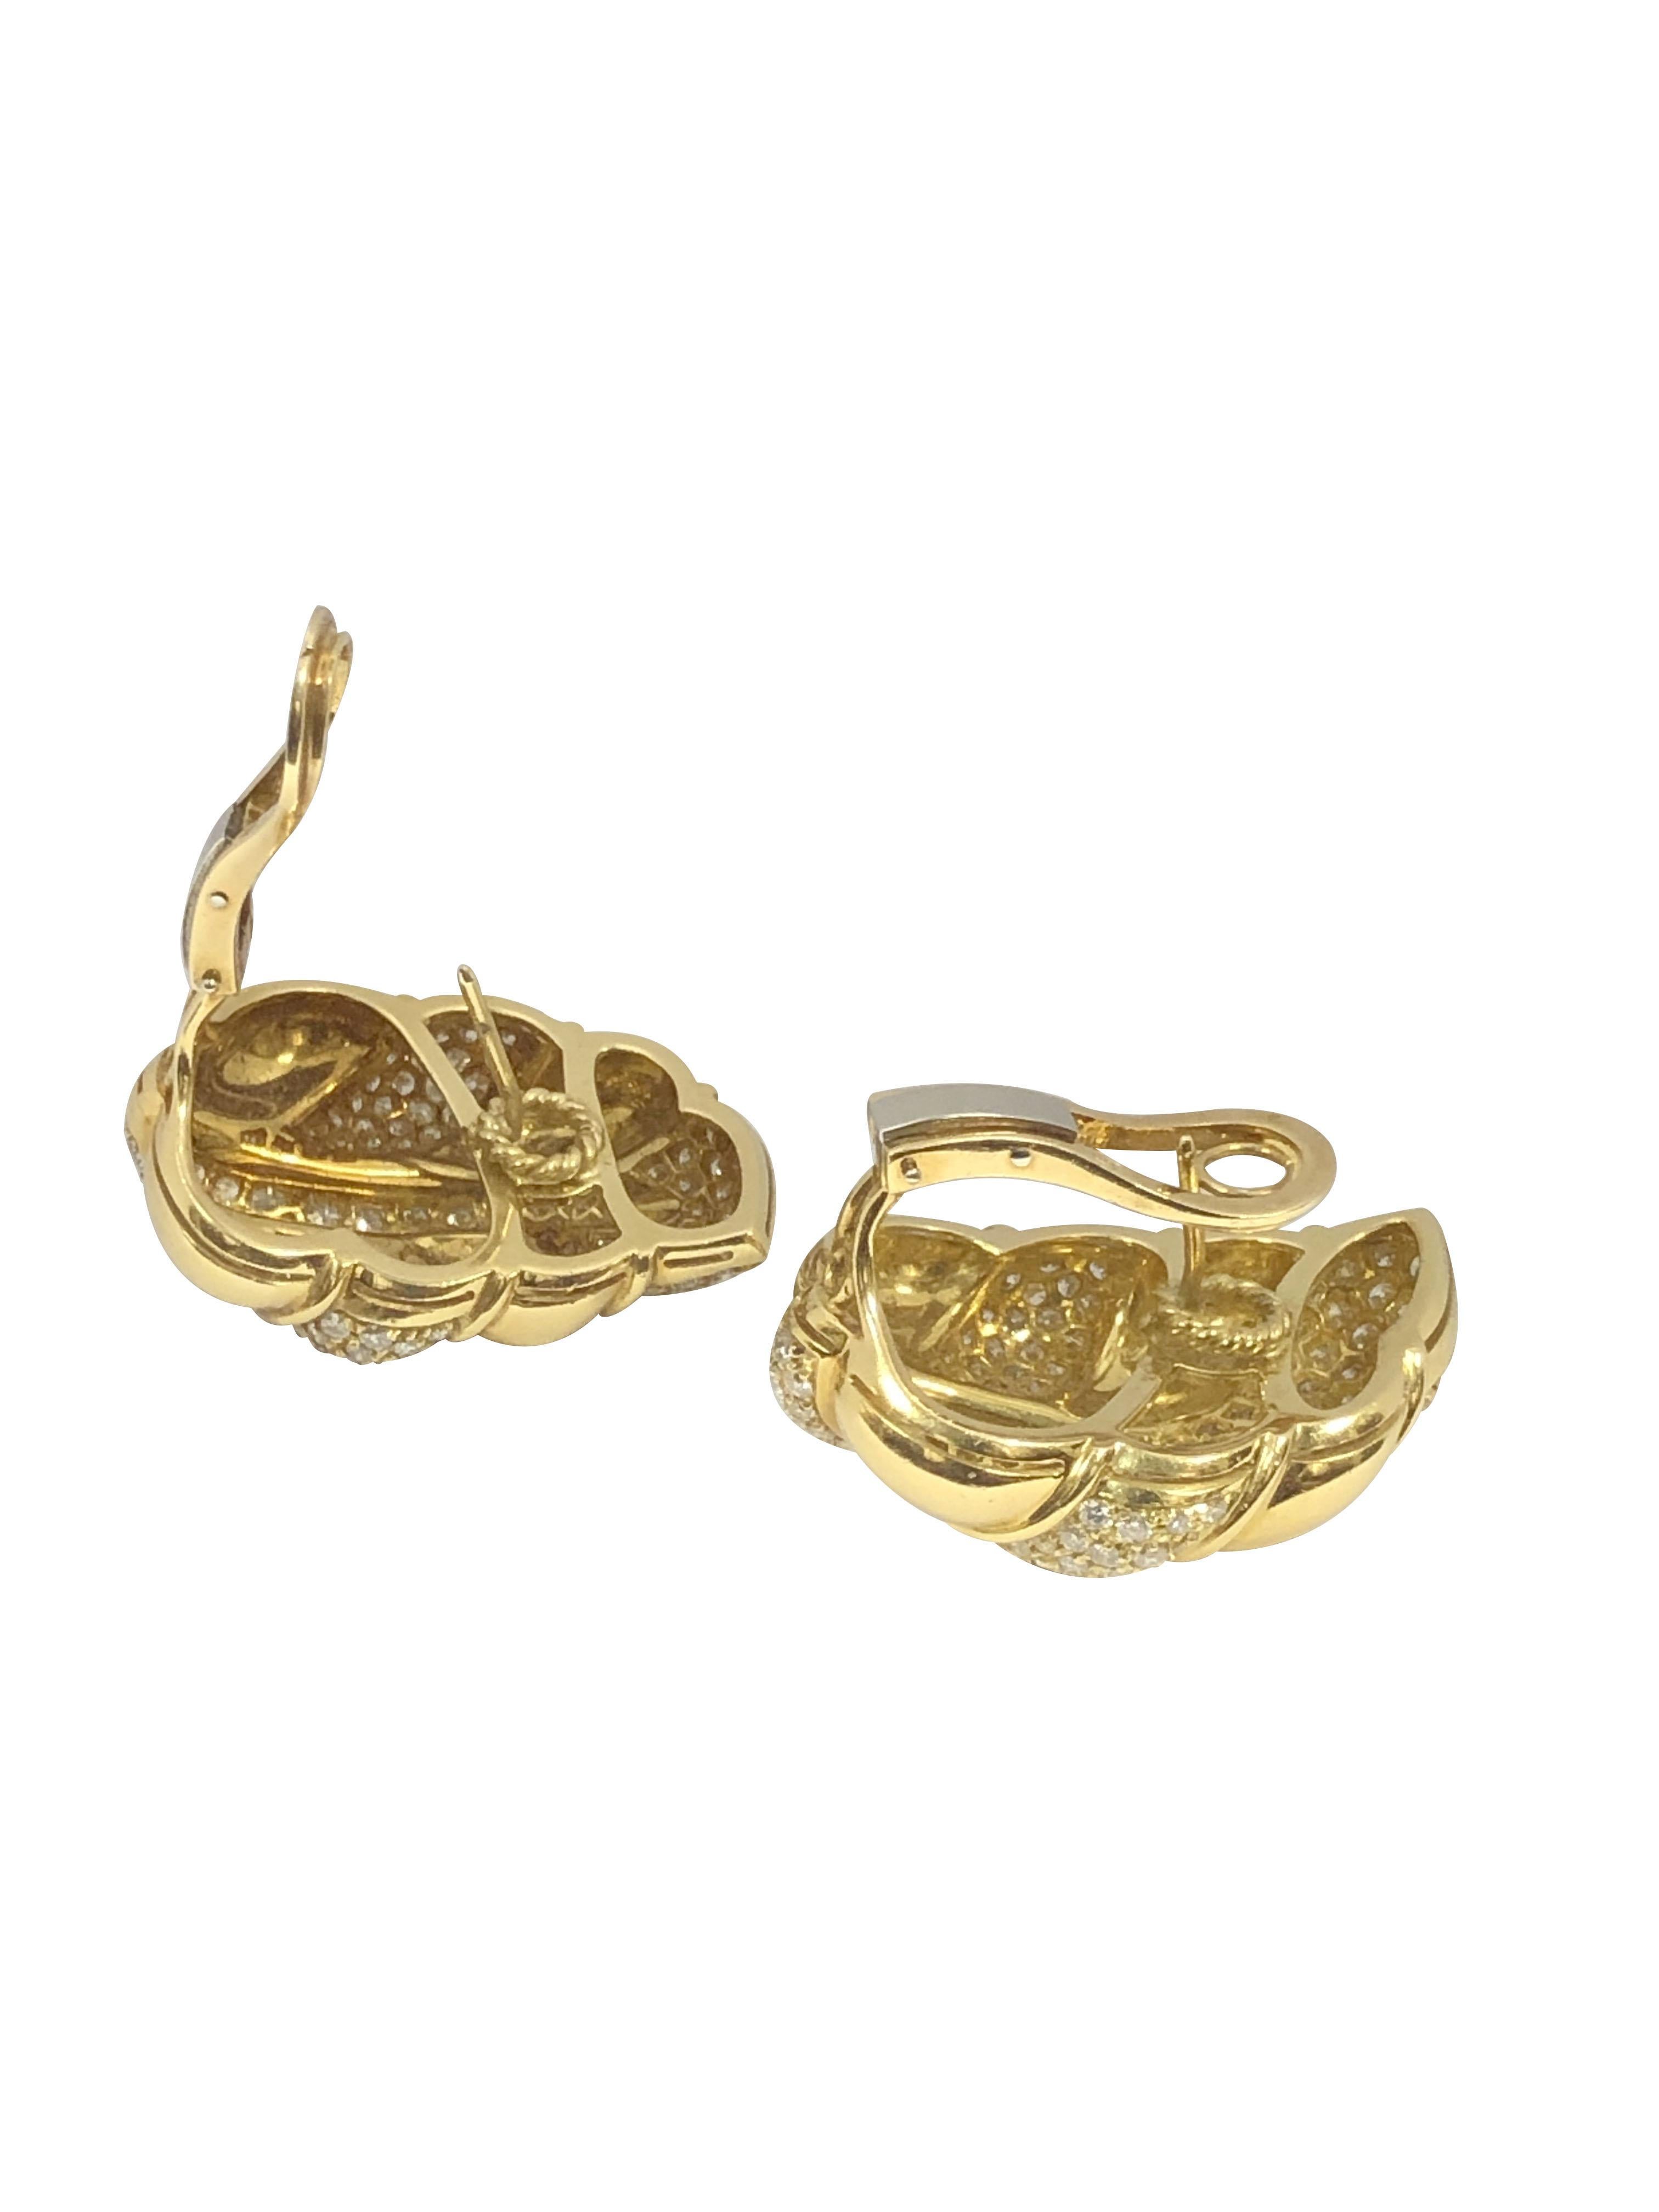 Circa 2000 18K Yellow Gold Leaf Form Earrings, Impressive and Large, measuring 1 1/4 inches in length X 1 inch wide and weighing 32.6 Grams. Set with Fine Round Brilliant cut Diamonds totaling 6 Carats and Grading as F-G in color and VS in Clarity. 